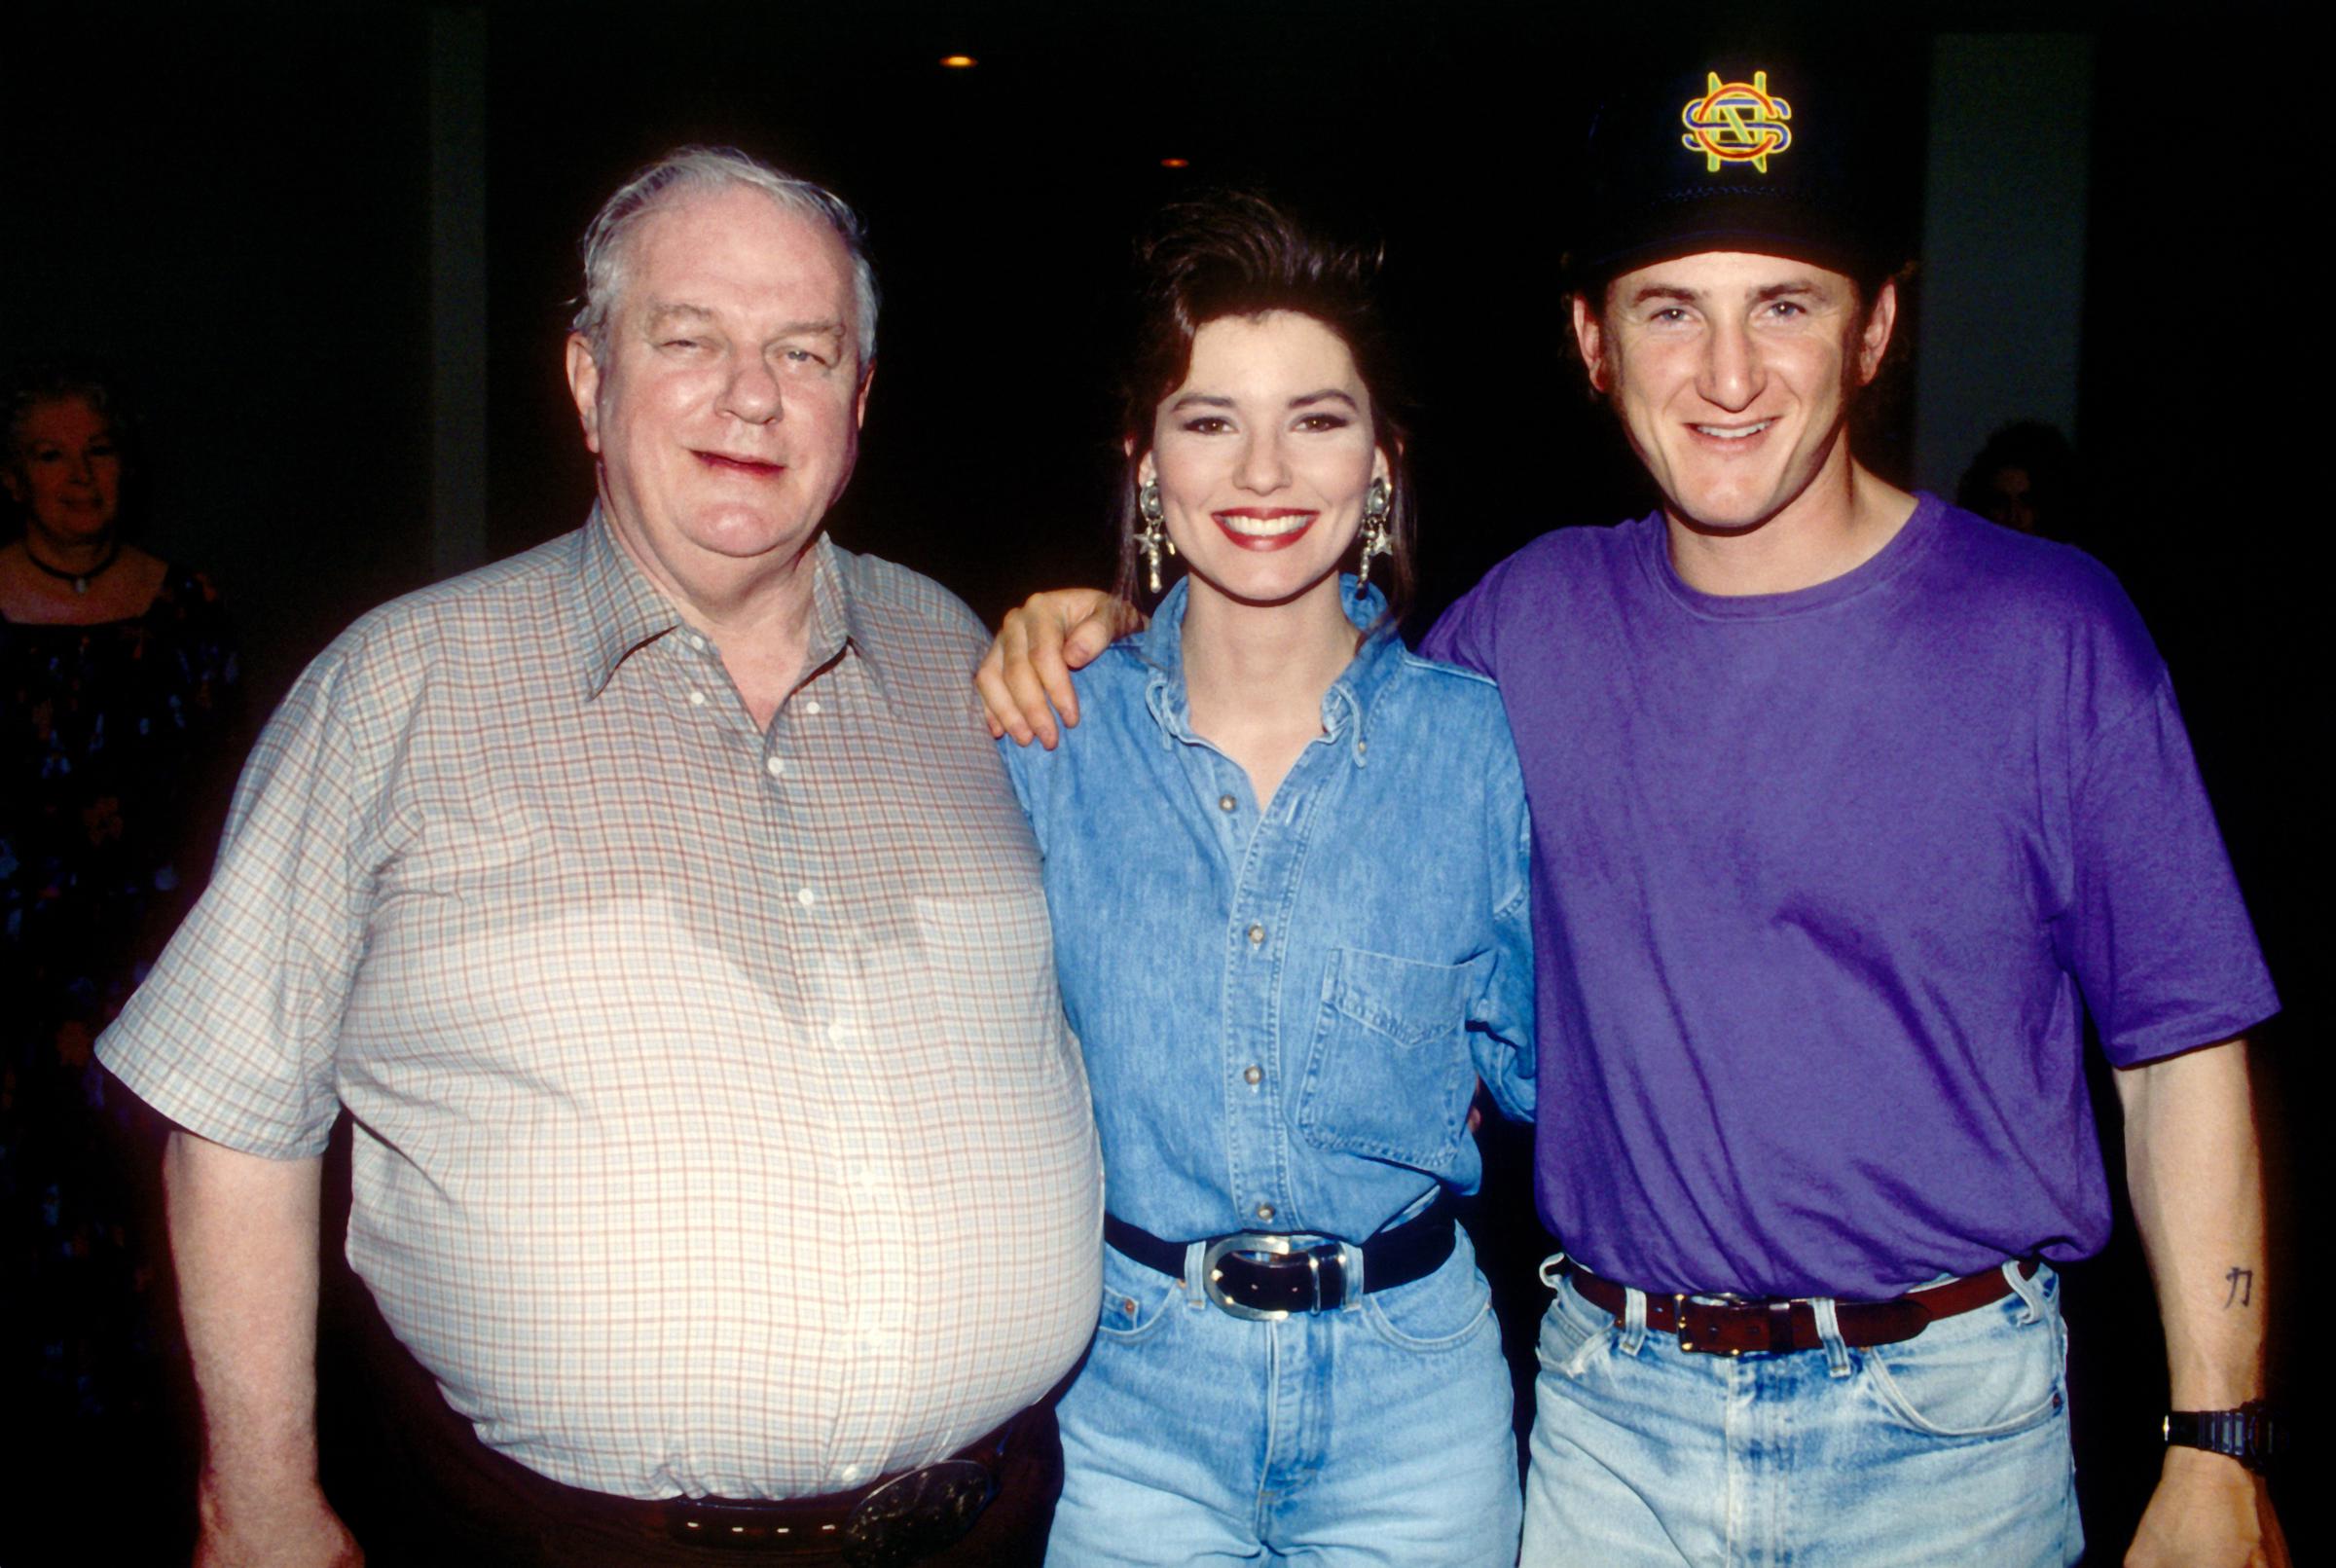 Charles Durning, Shania Twain, and Sean Penn on the set of Twain's music video "Dance with the One That Brought You," circa May 1993, in Los Angeles, California. | Source: Getty Images